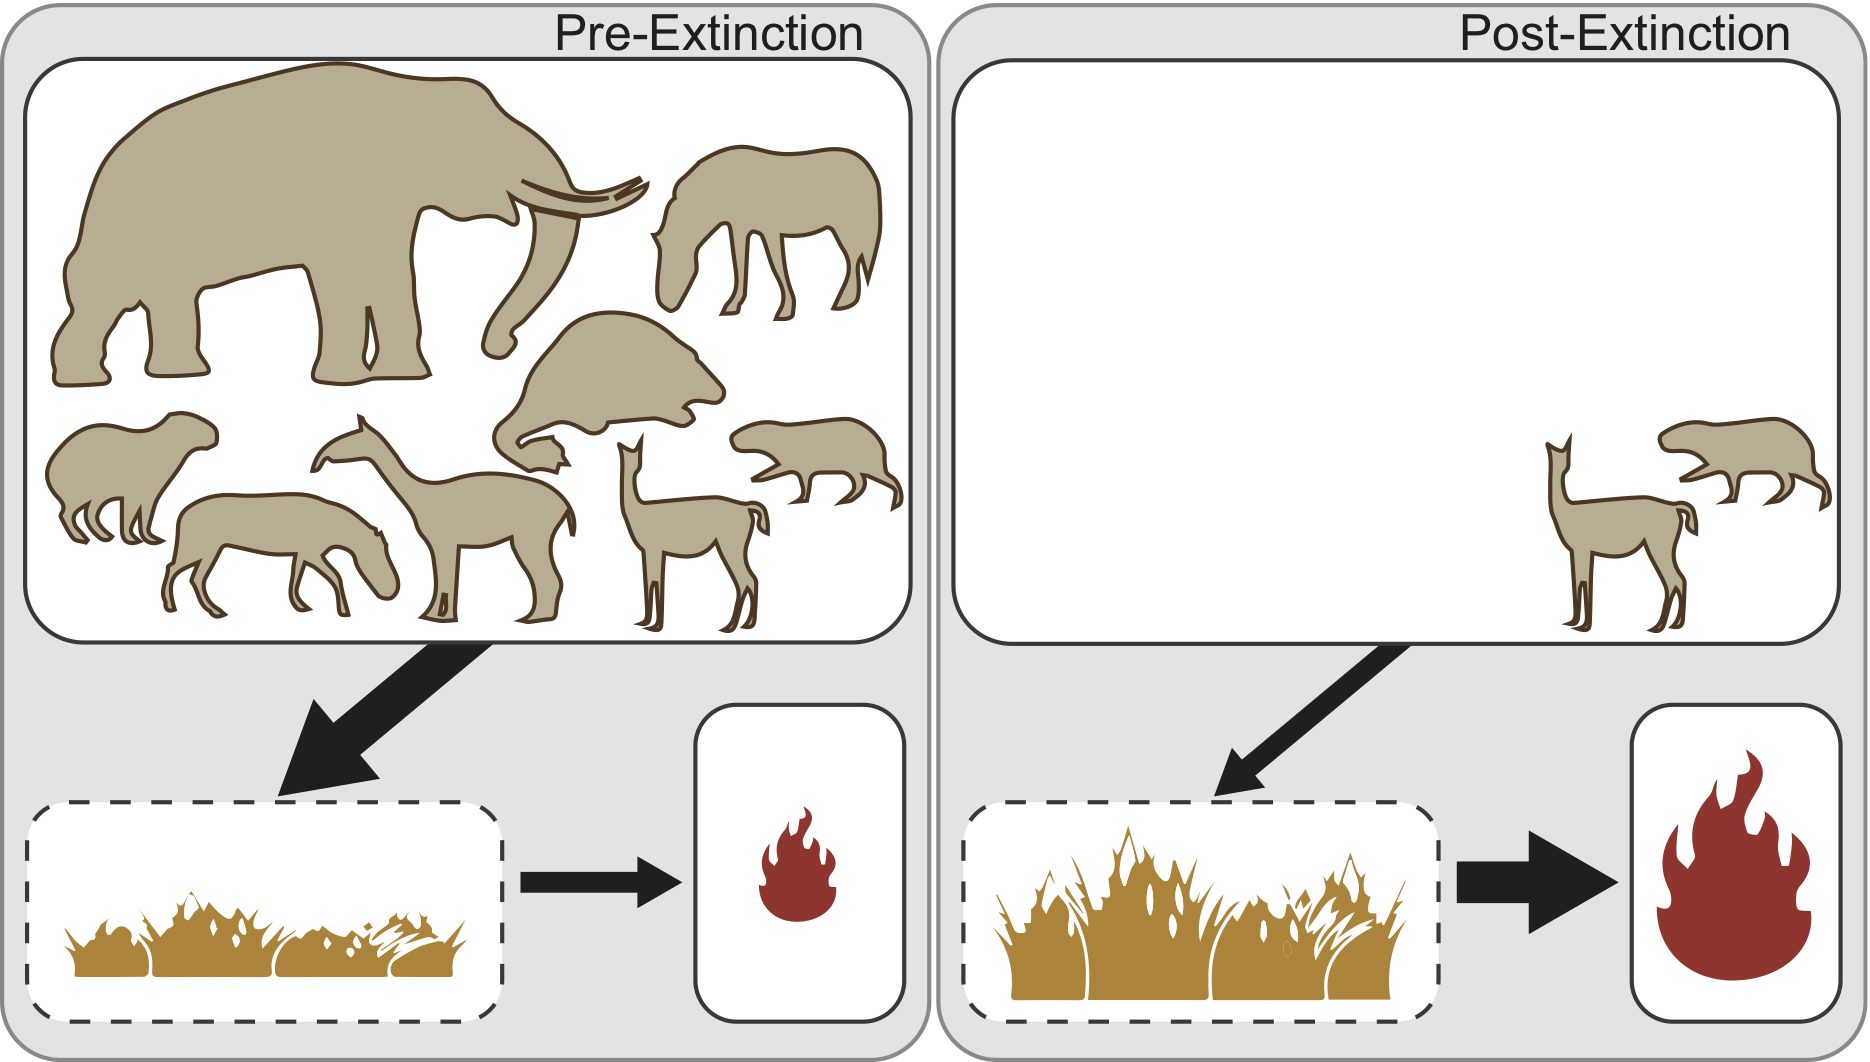 Fire activity and the extinction of herbivores with a detrimental effect